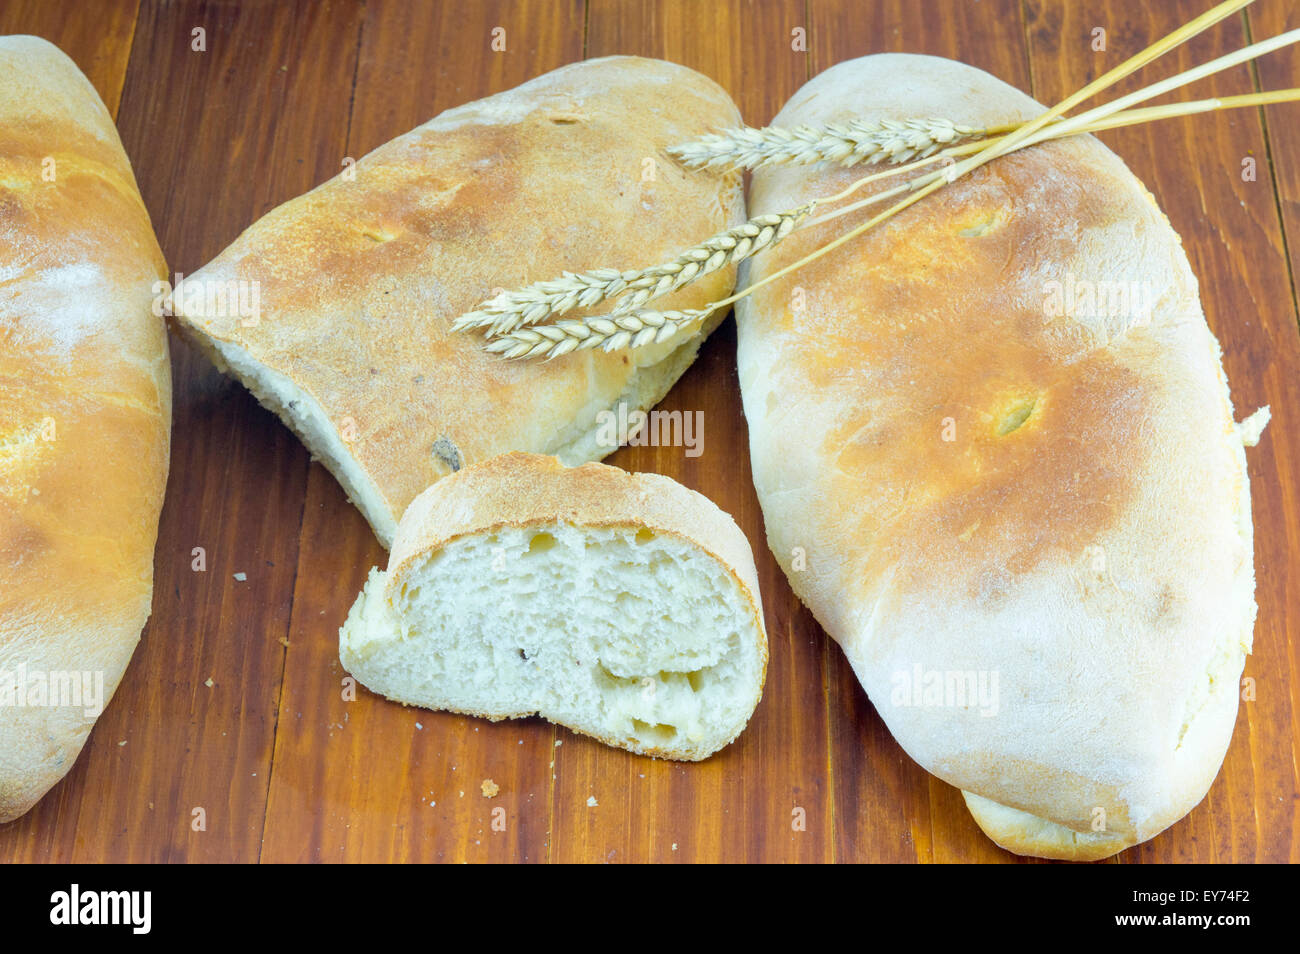 Cut homemade bread on a table decorated with wheat Stock Photo